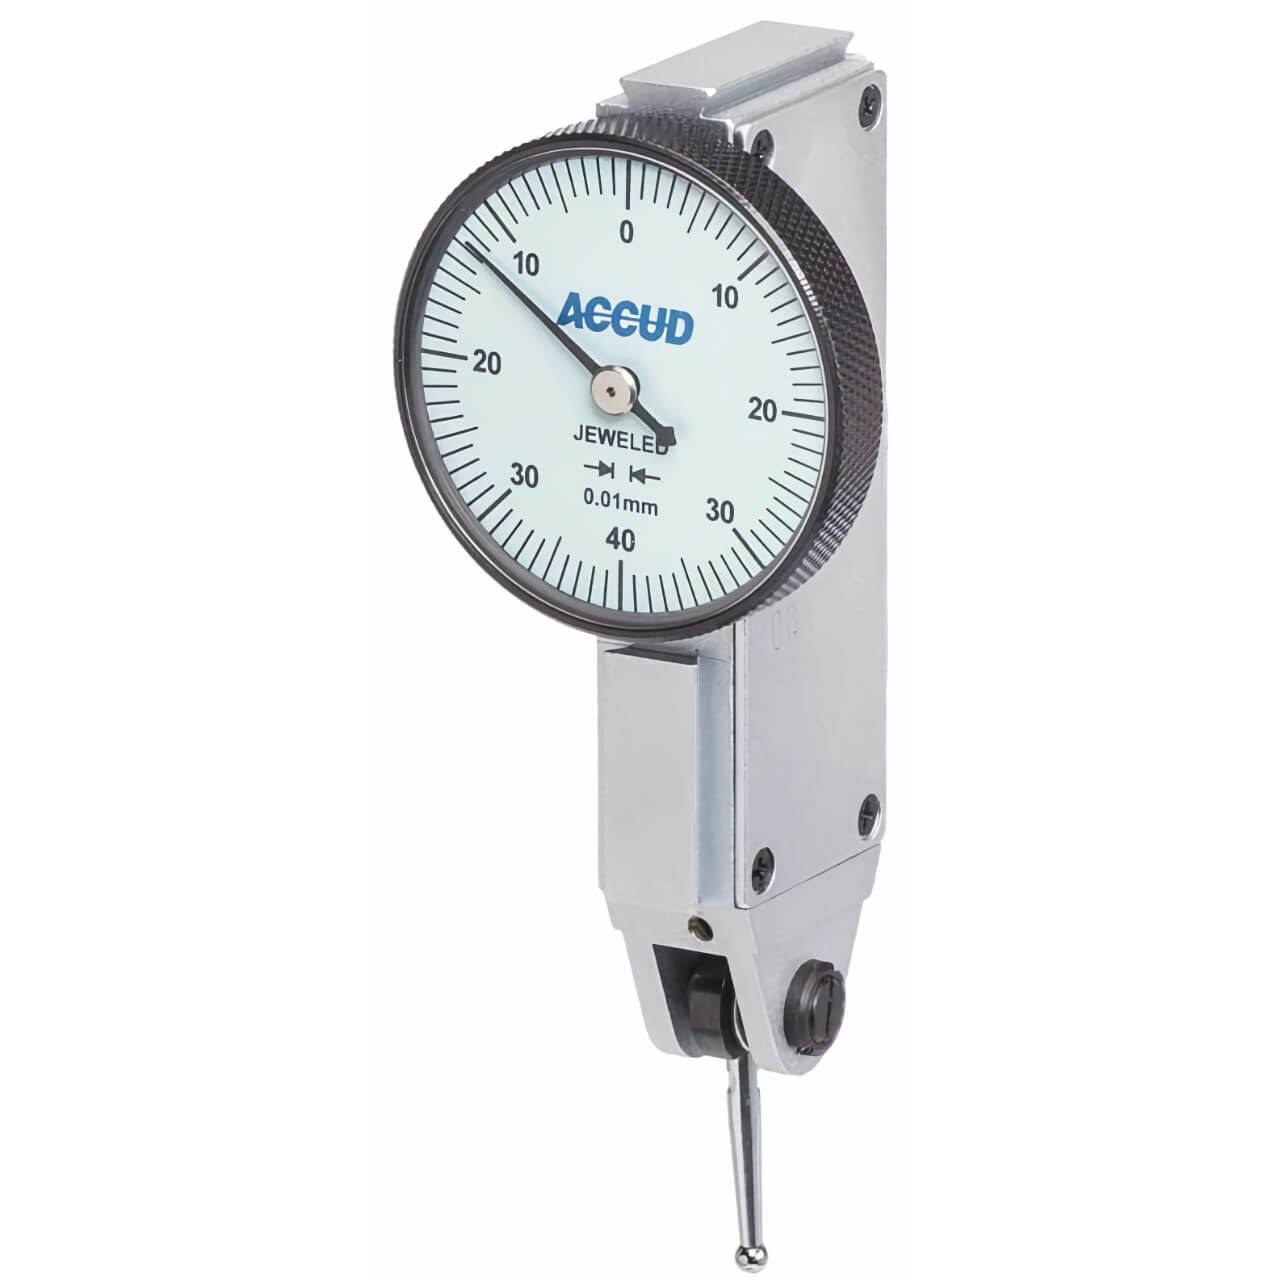 Accud 0.8mm Metric Lever Type Dial Test Indicator